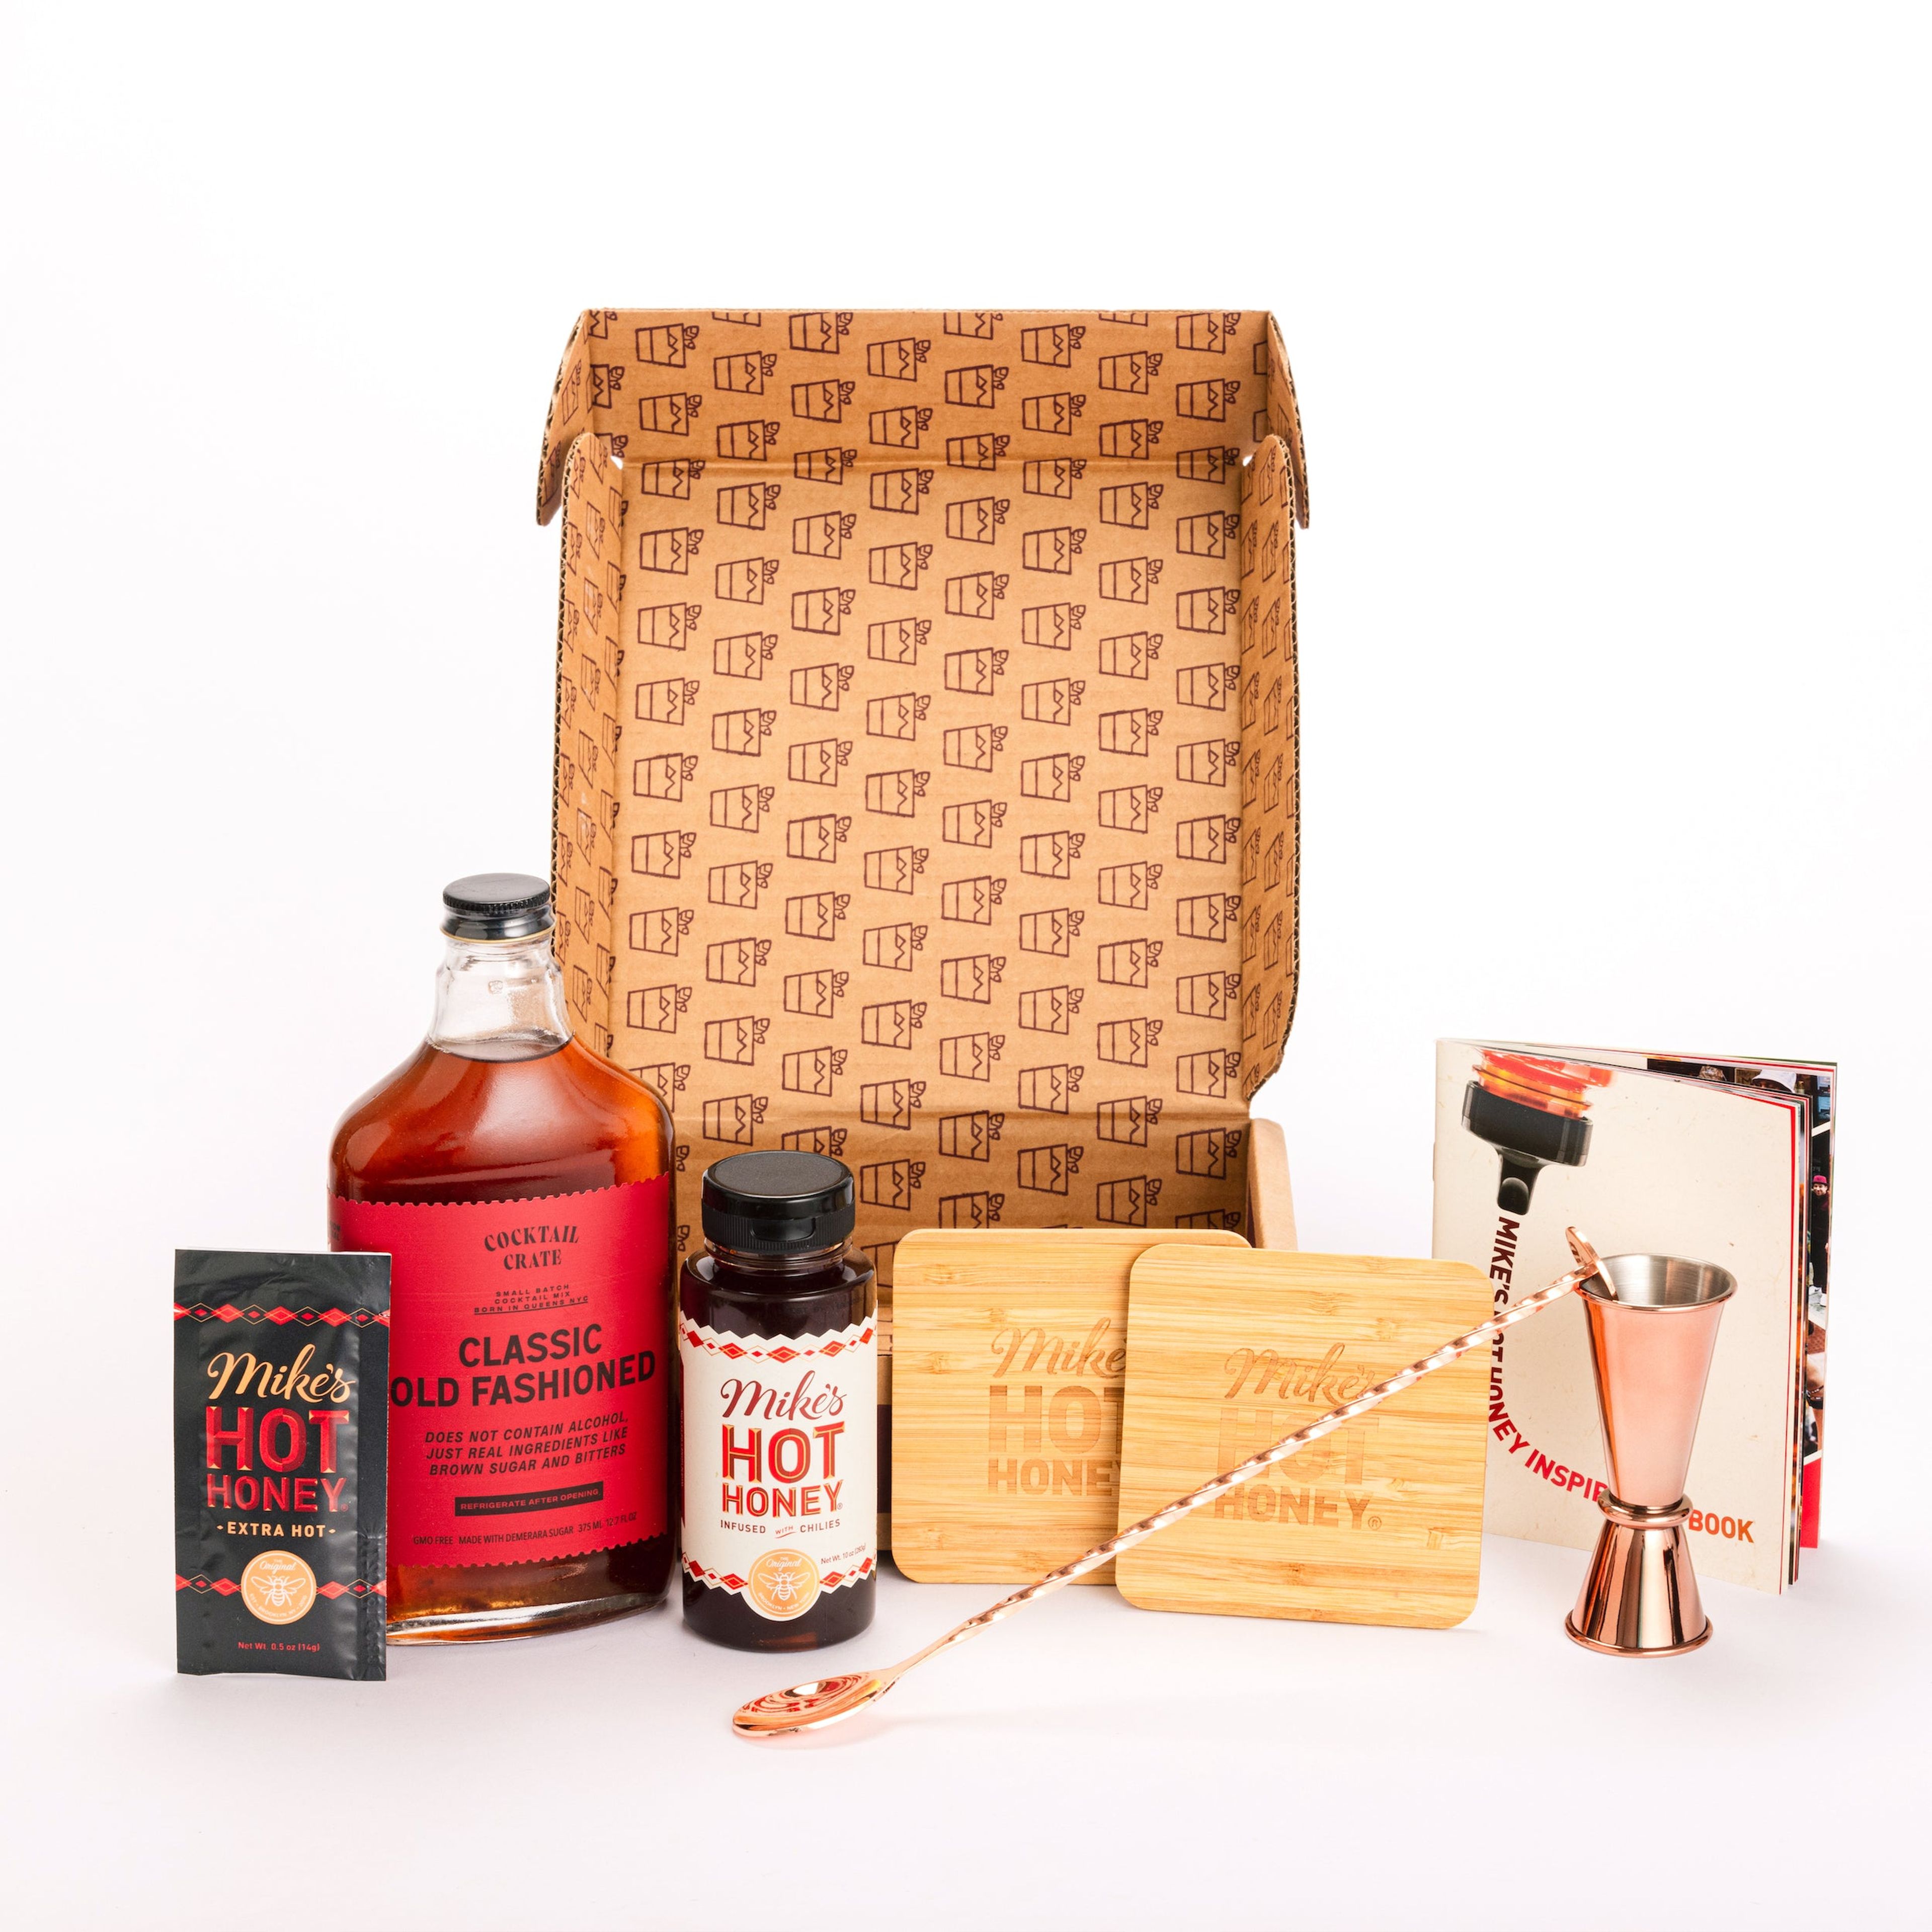 www.mikeshothoney.com/products/copy-of-mikes-hot-honey-gift-set